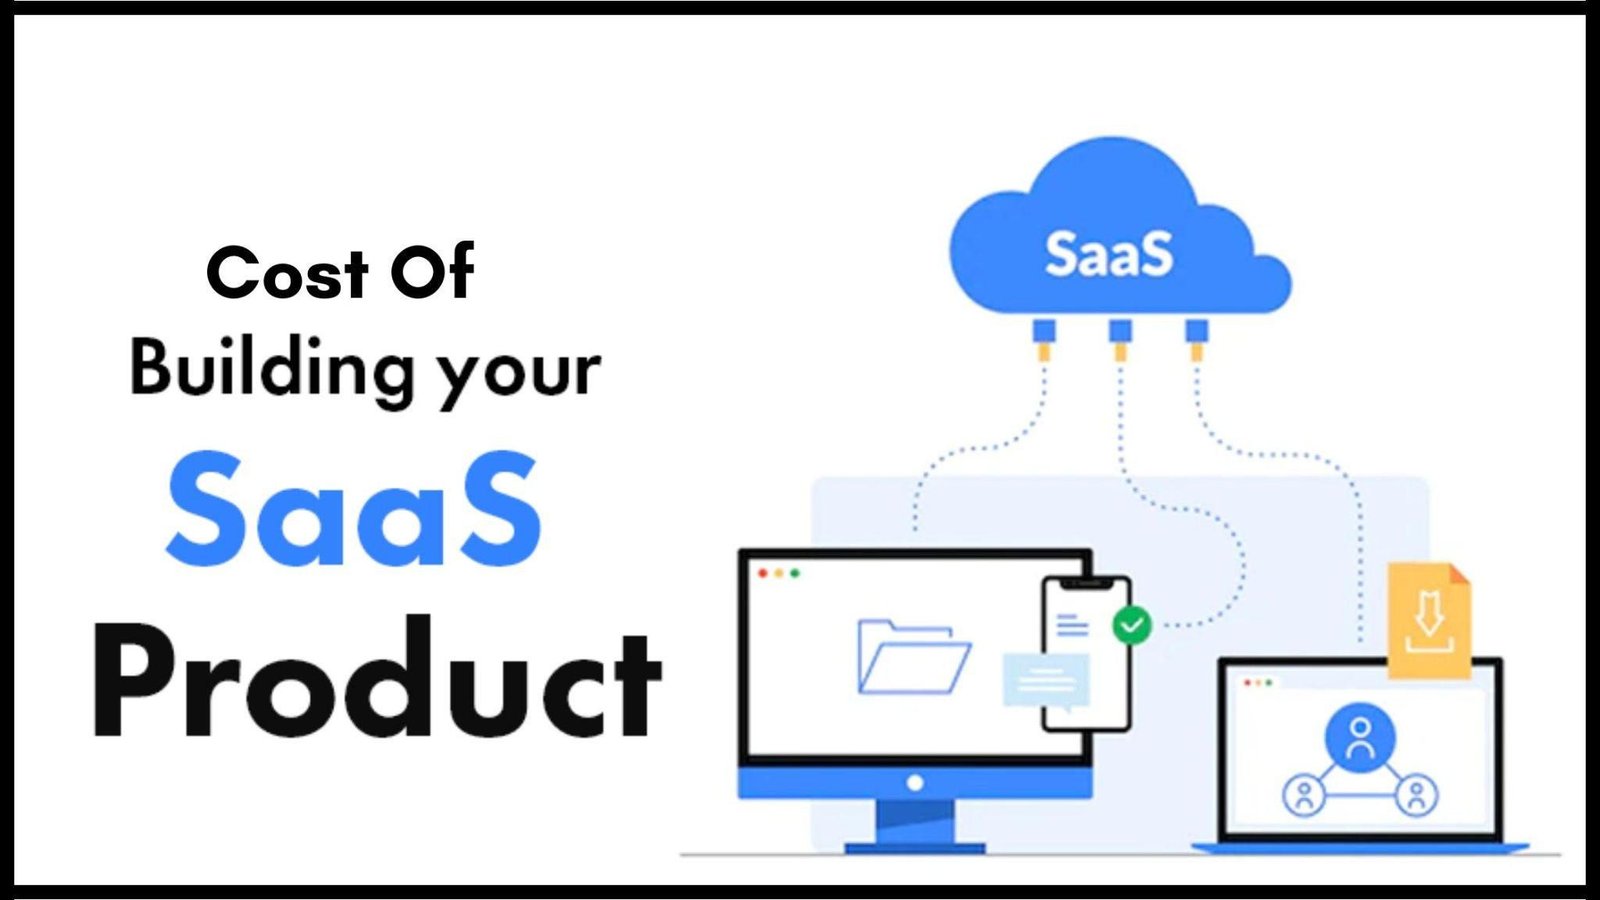 How Much Does it Cost to Develop a SaaS Product?